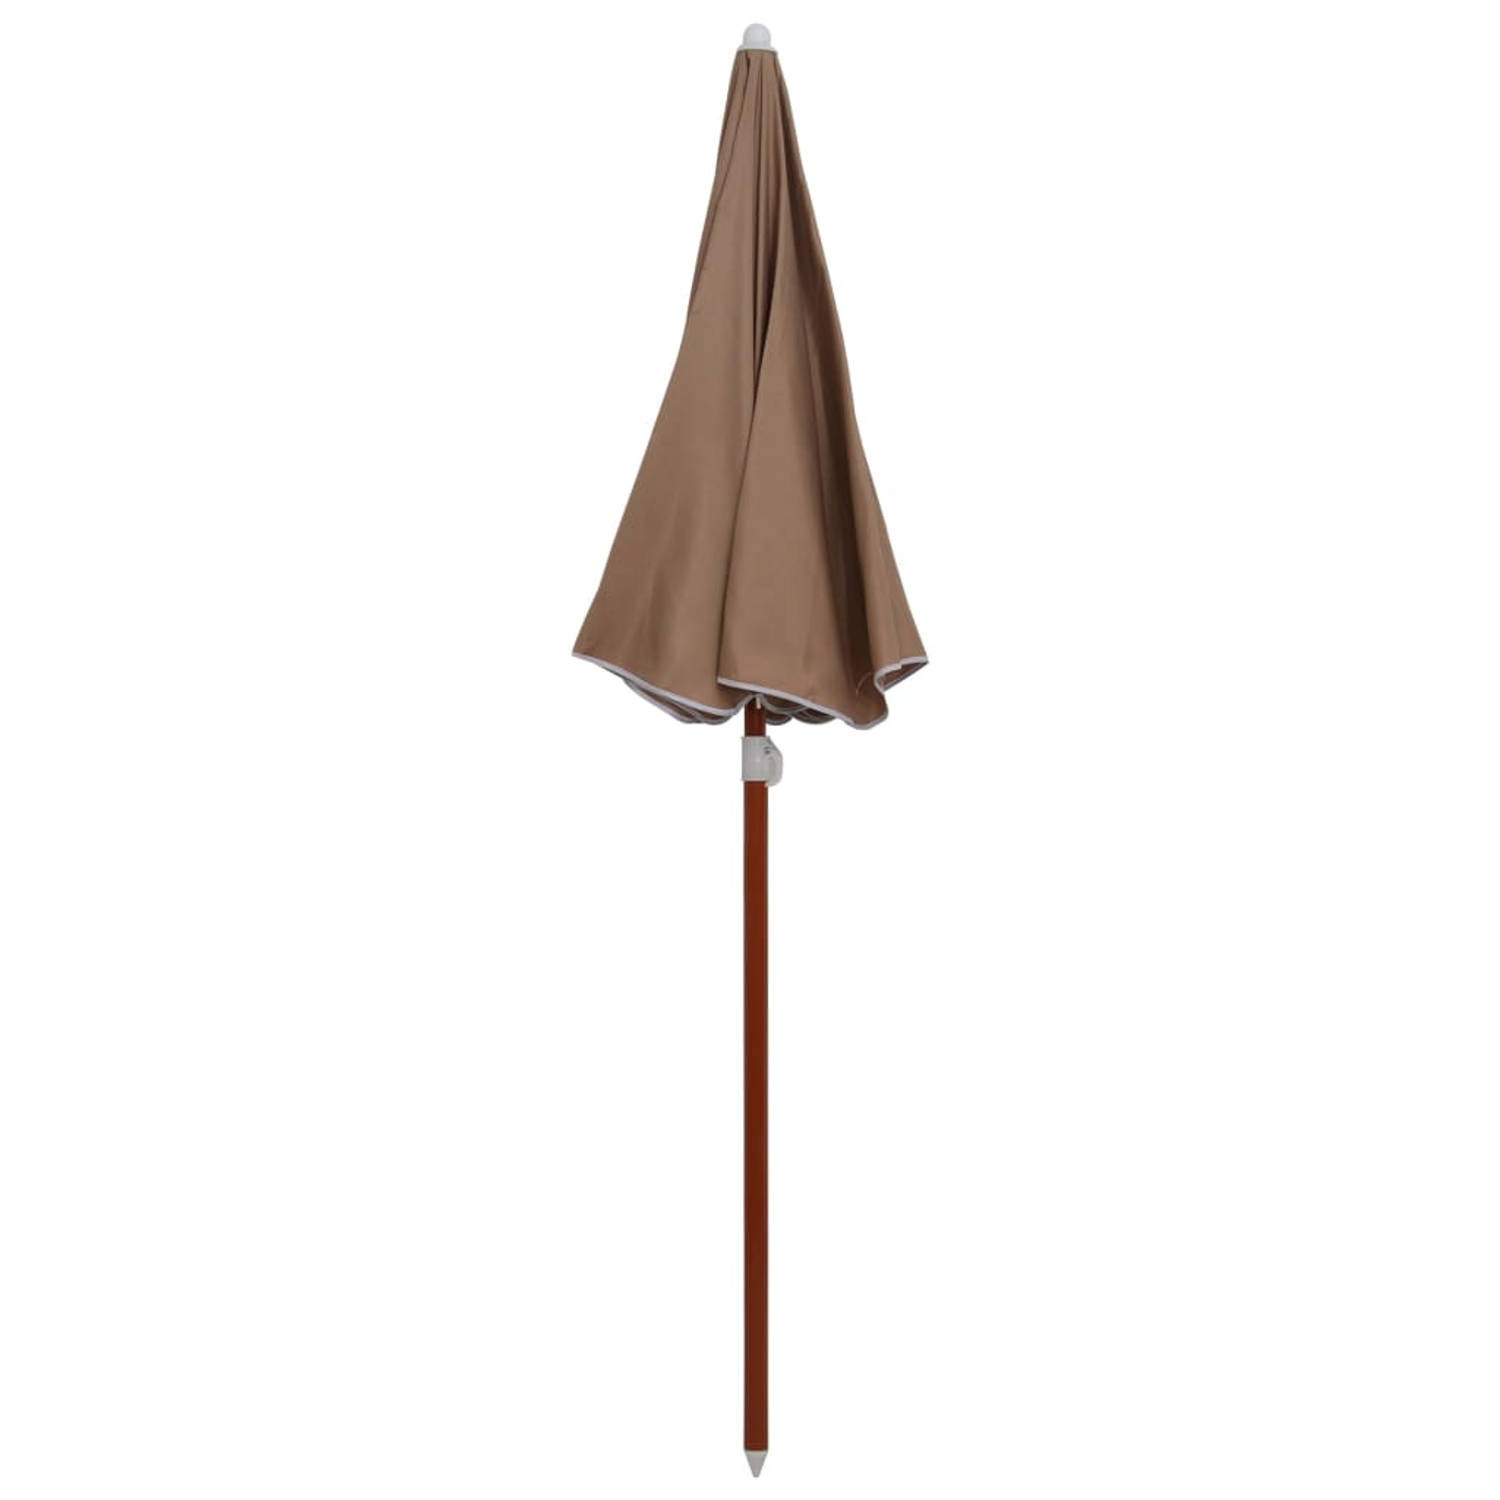 The Living Store - Parasol - 155x190 cm - Uv-bescherming - Polyester - Taupe